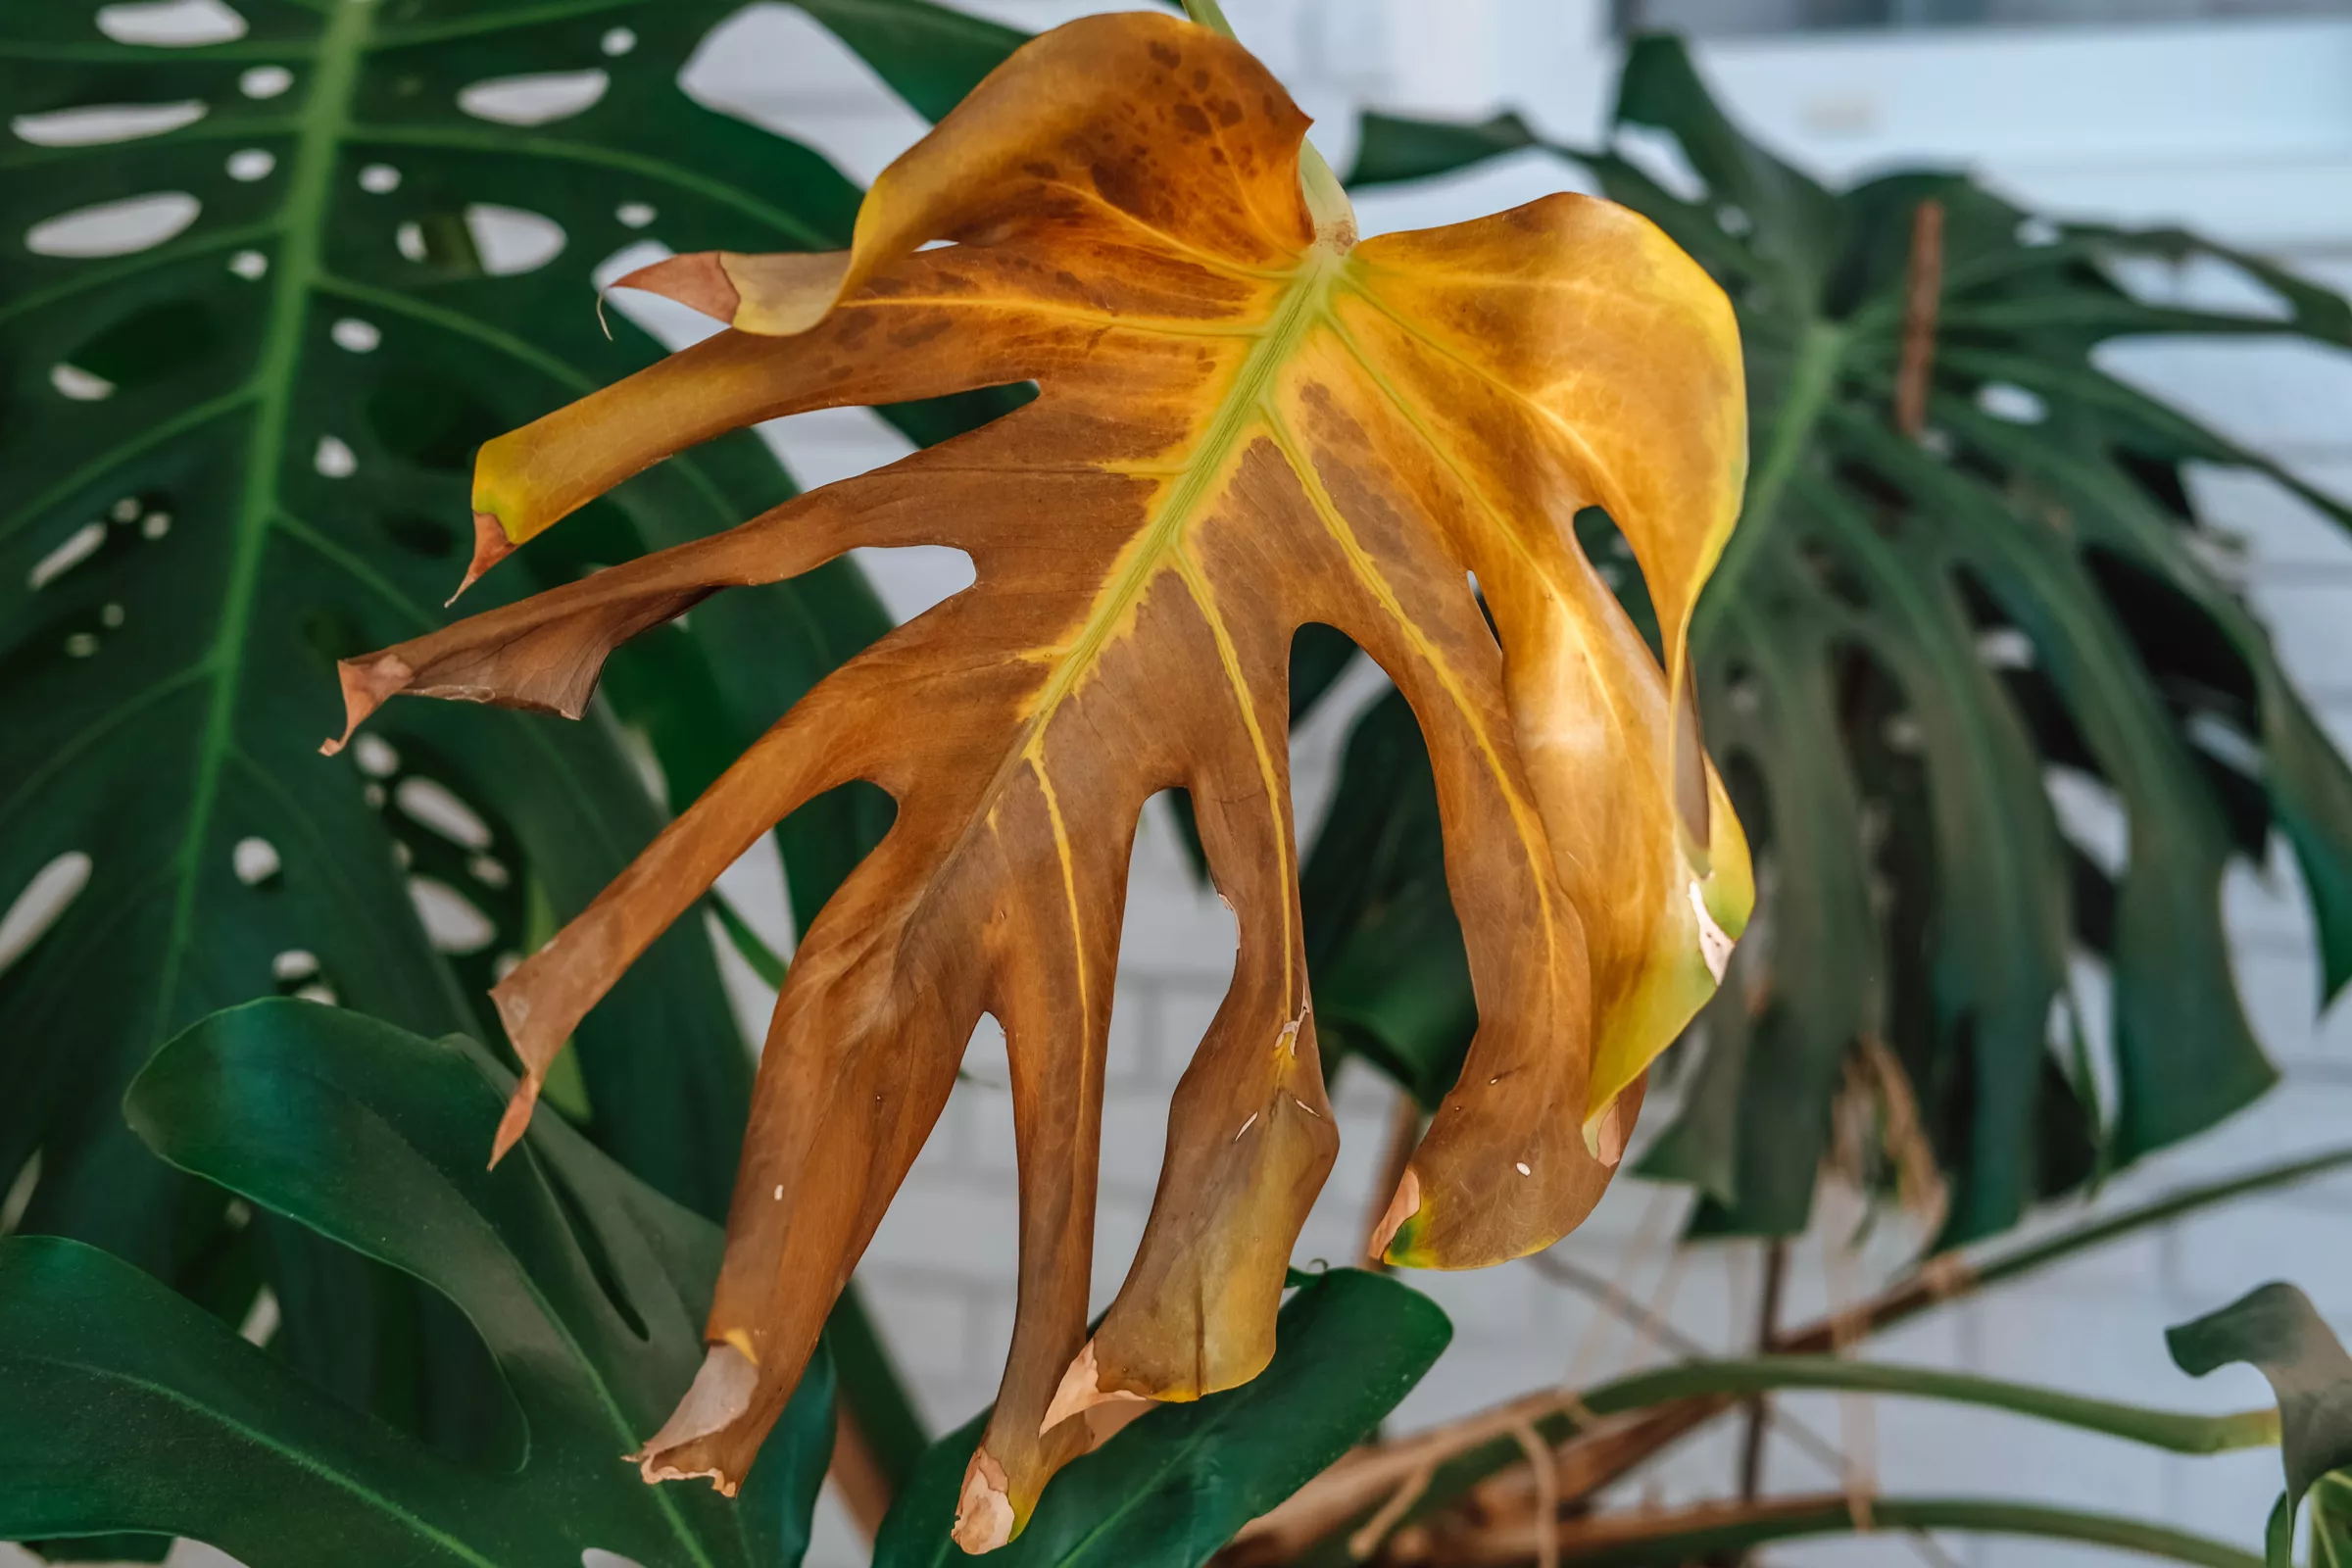 Why The Leaves Of My Plants Turning Brown? (Causes & Solutions)